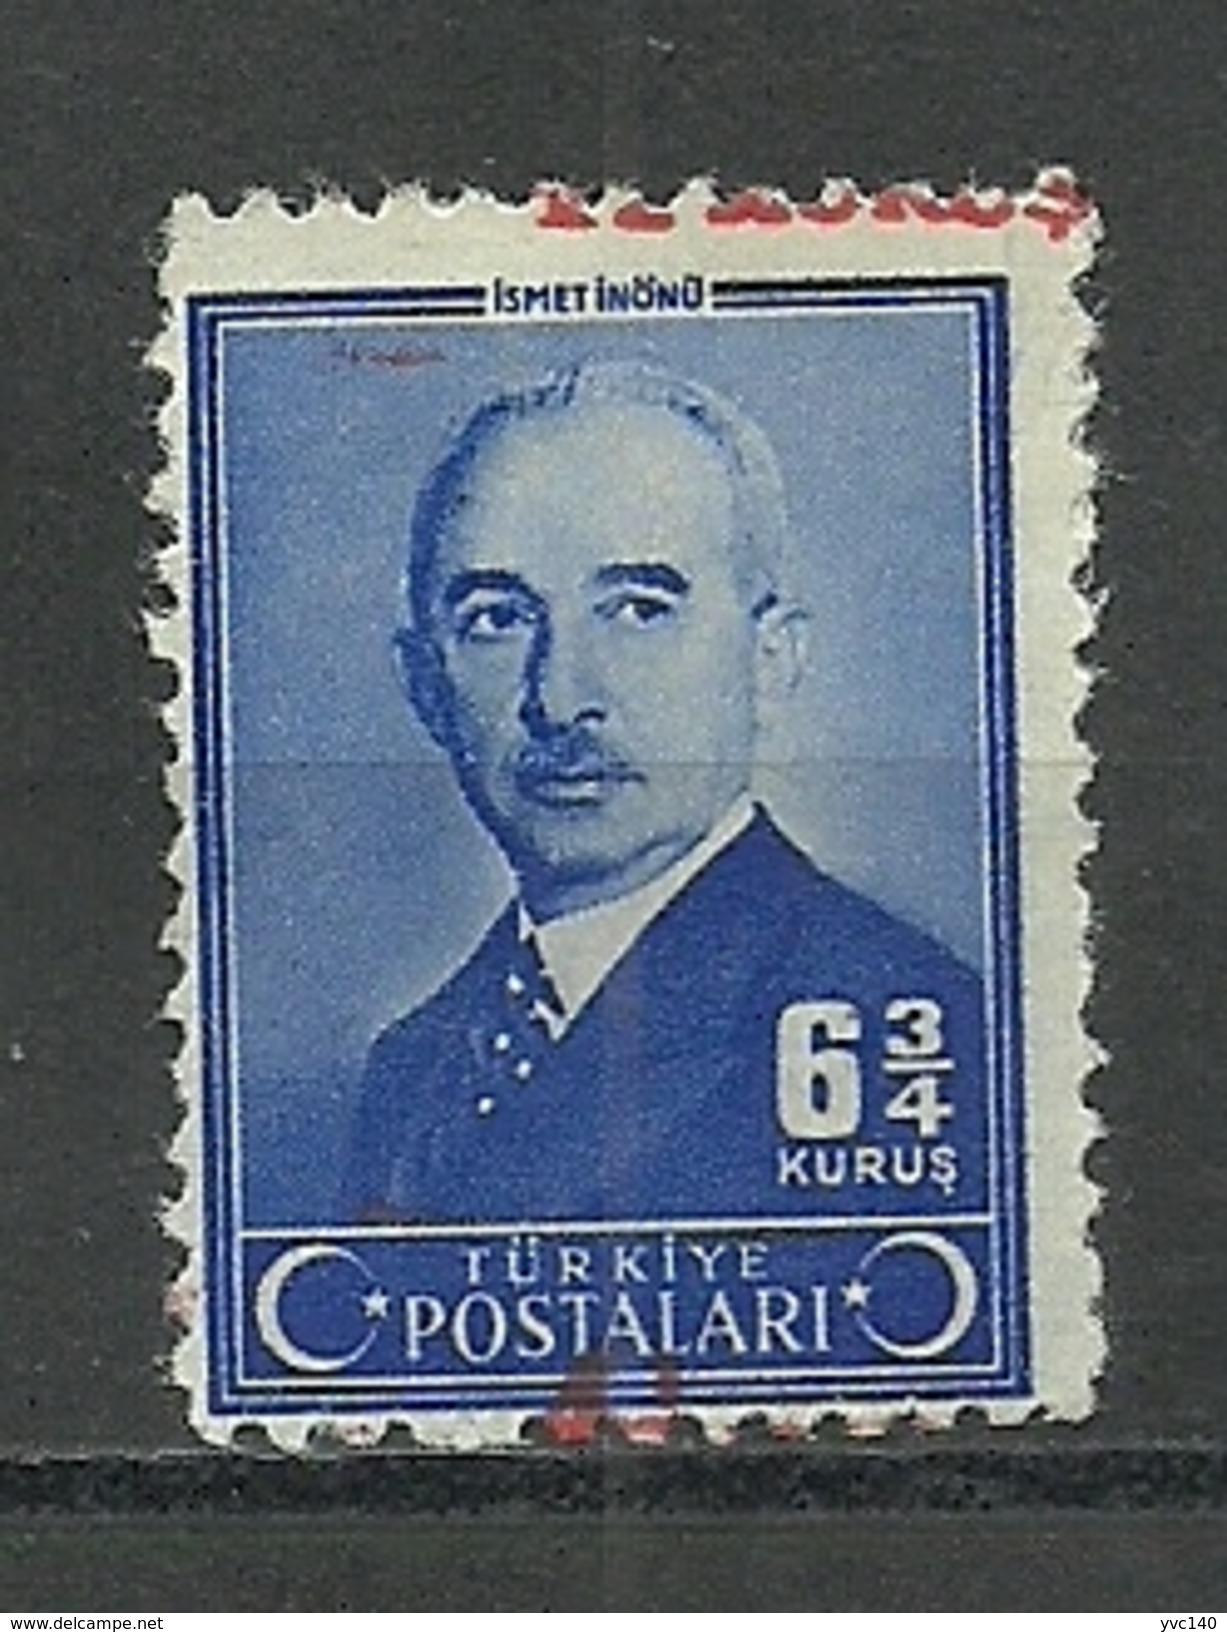 Turkey; 1943 Overprinted Postage Stamp, ERROR "Shifted Surcharge" - Neufs